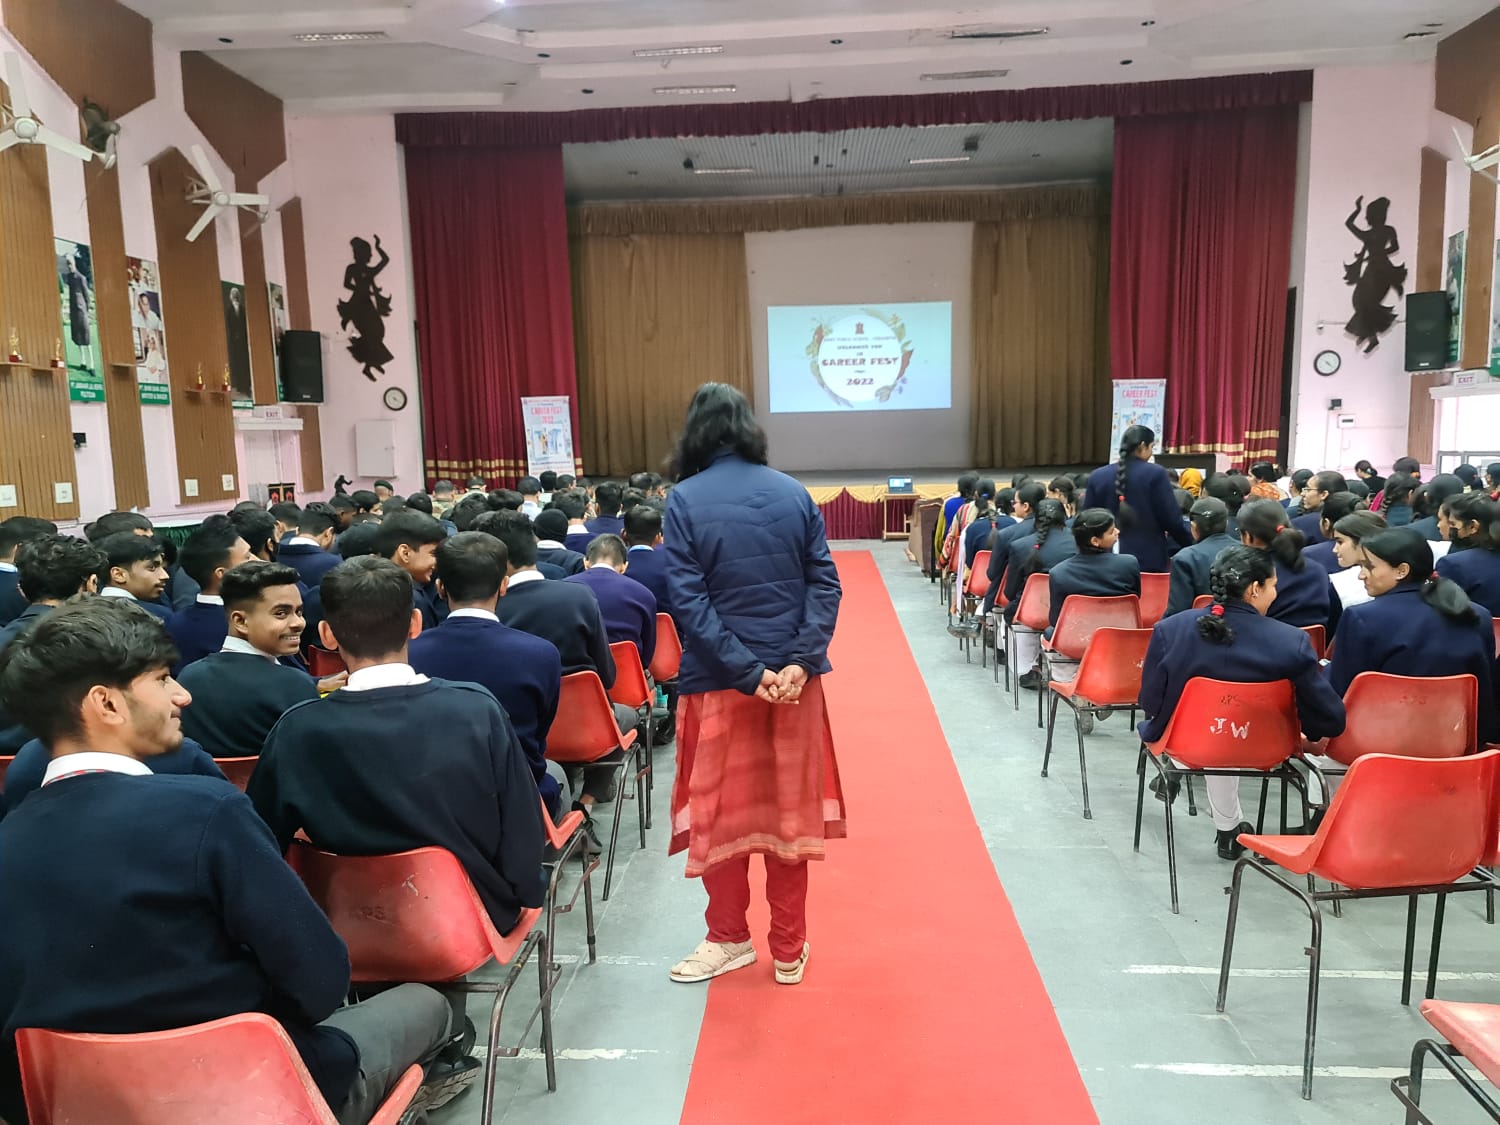 On 26 November 2022 a Career Fair was conducted by APS Udhampur and 30 Universities participated in it from all over India and Abroad.